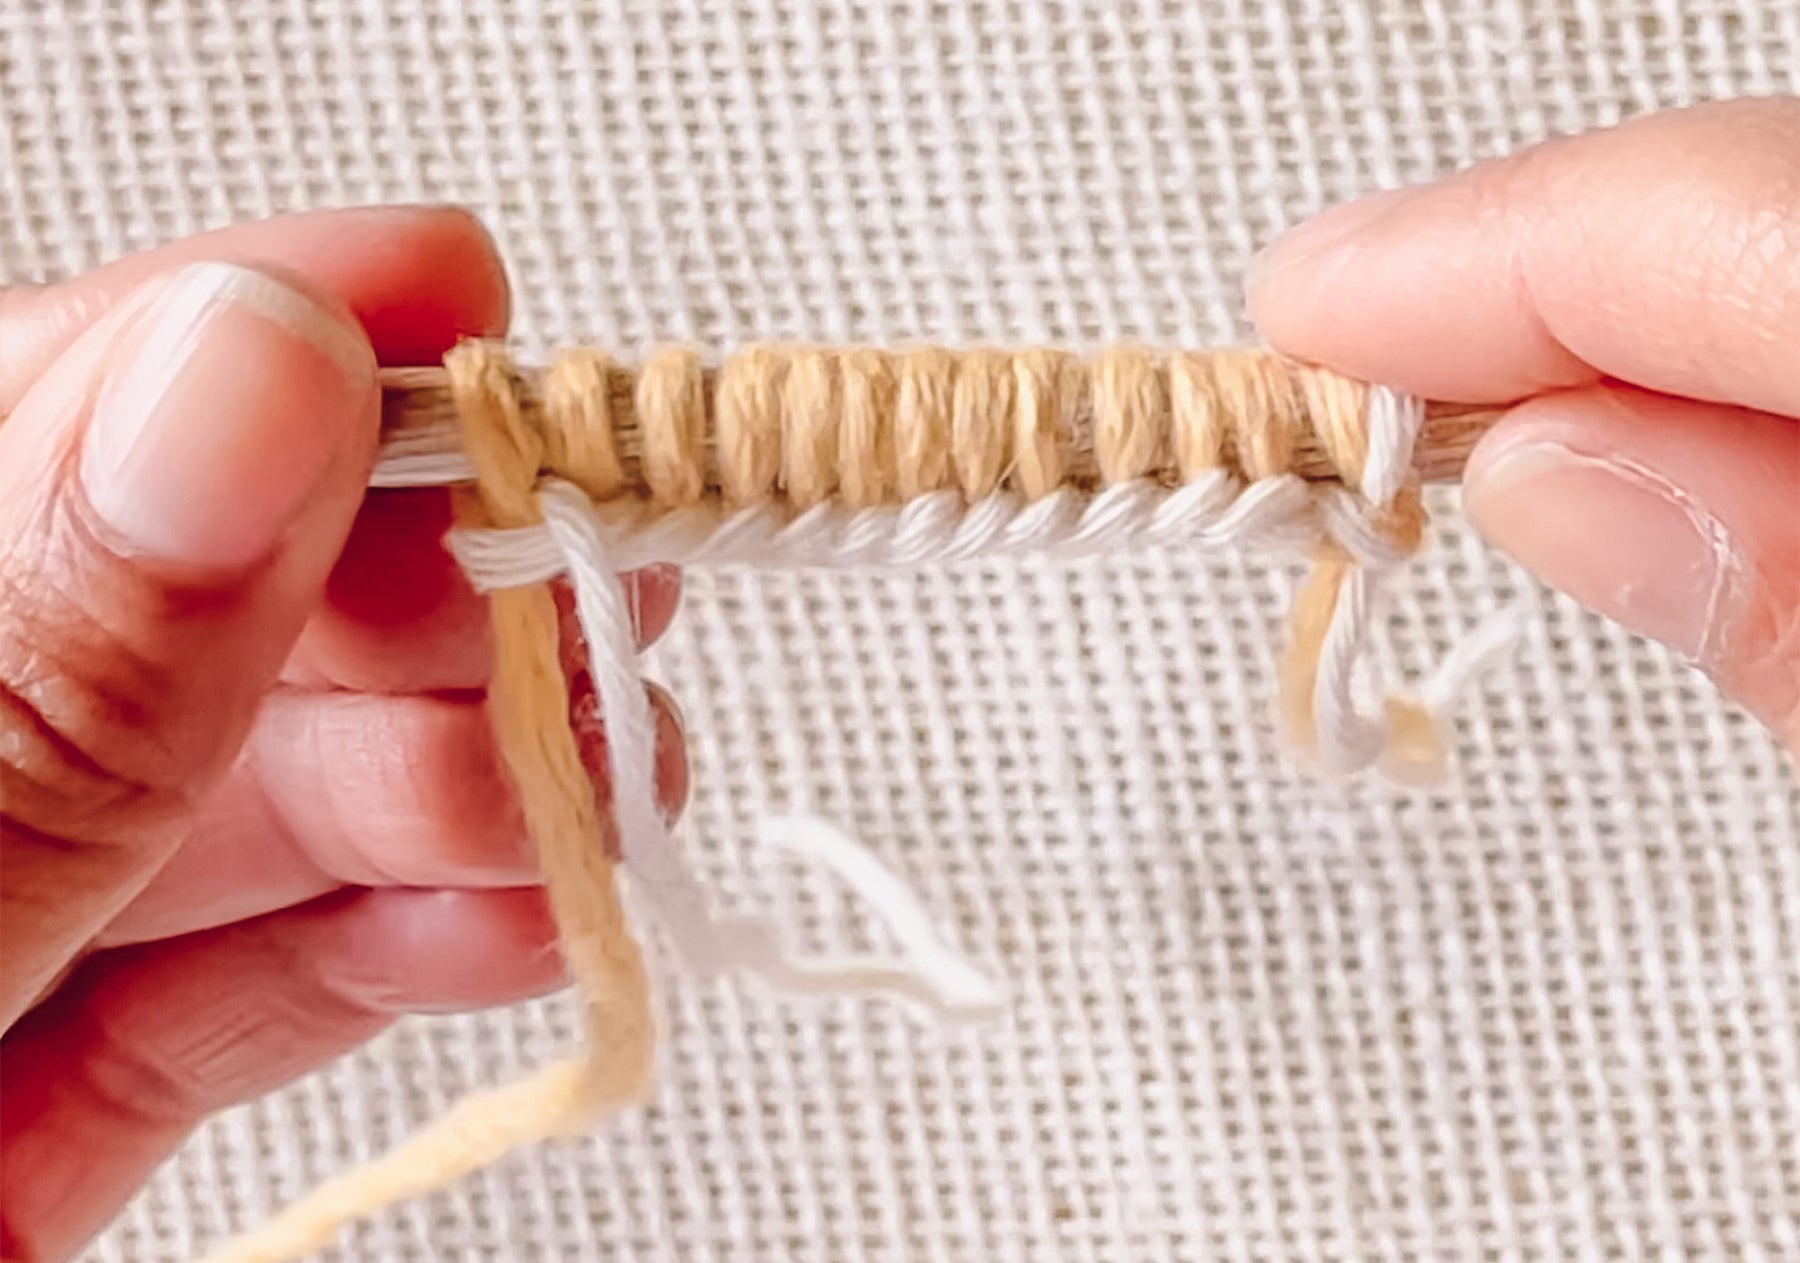 How To Knit A Provisional Cast On